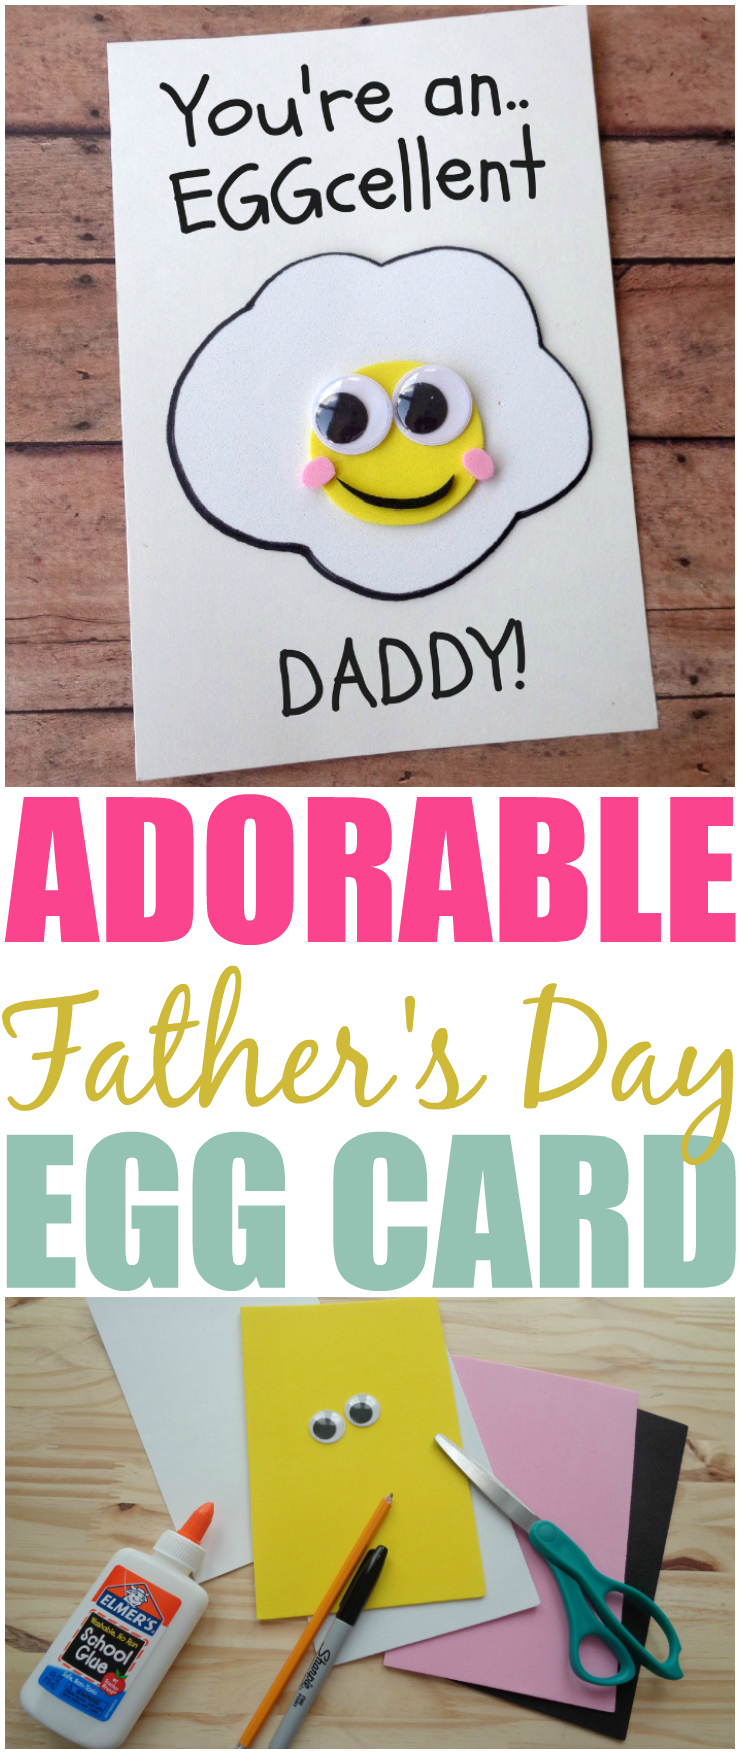 DIY Father's Day Card: You're An EGGcellent Daddy
